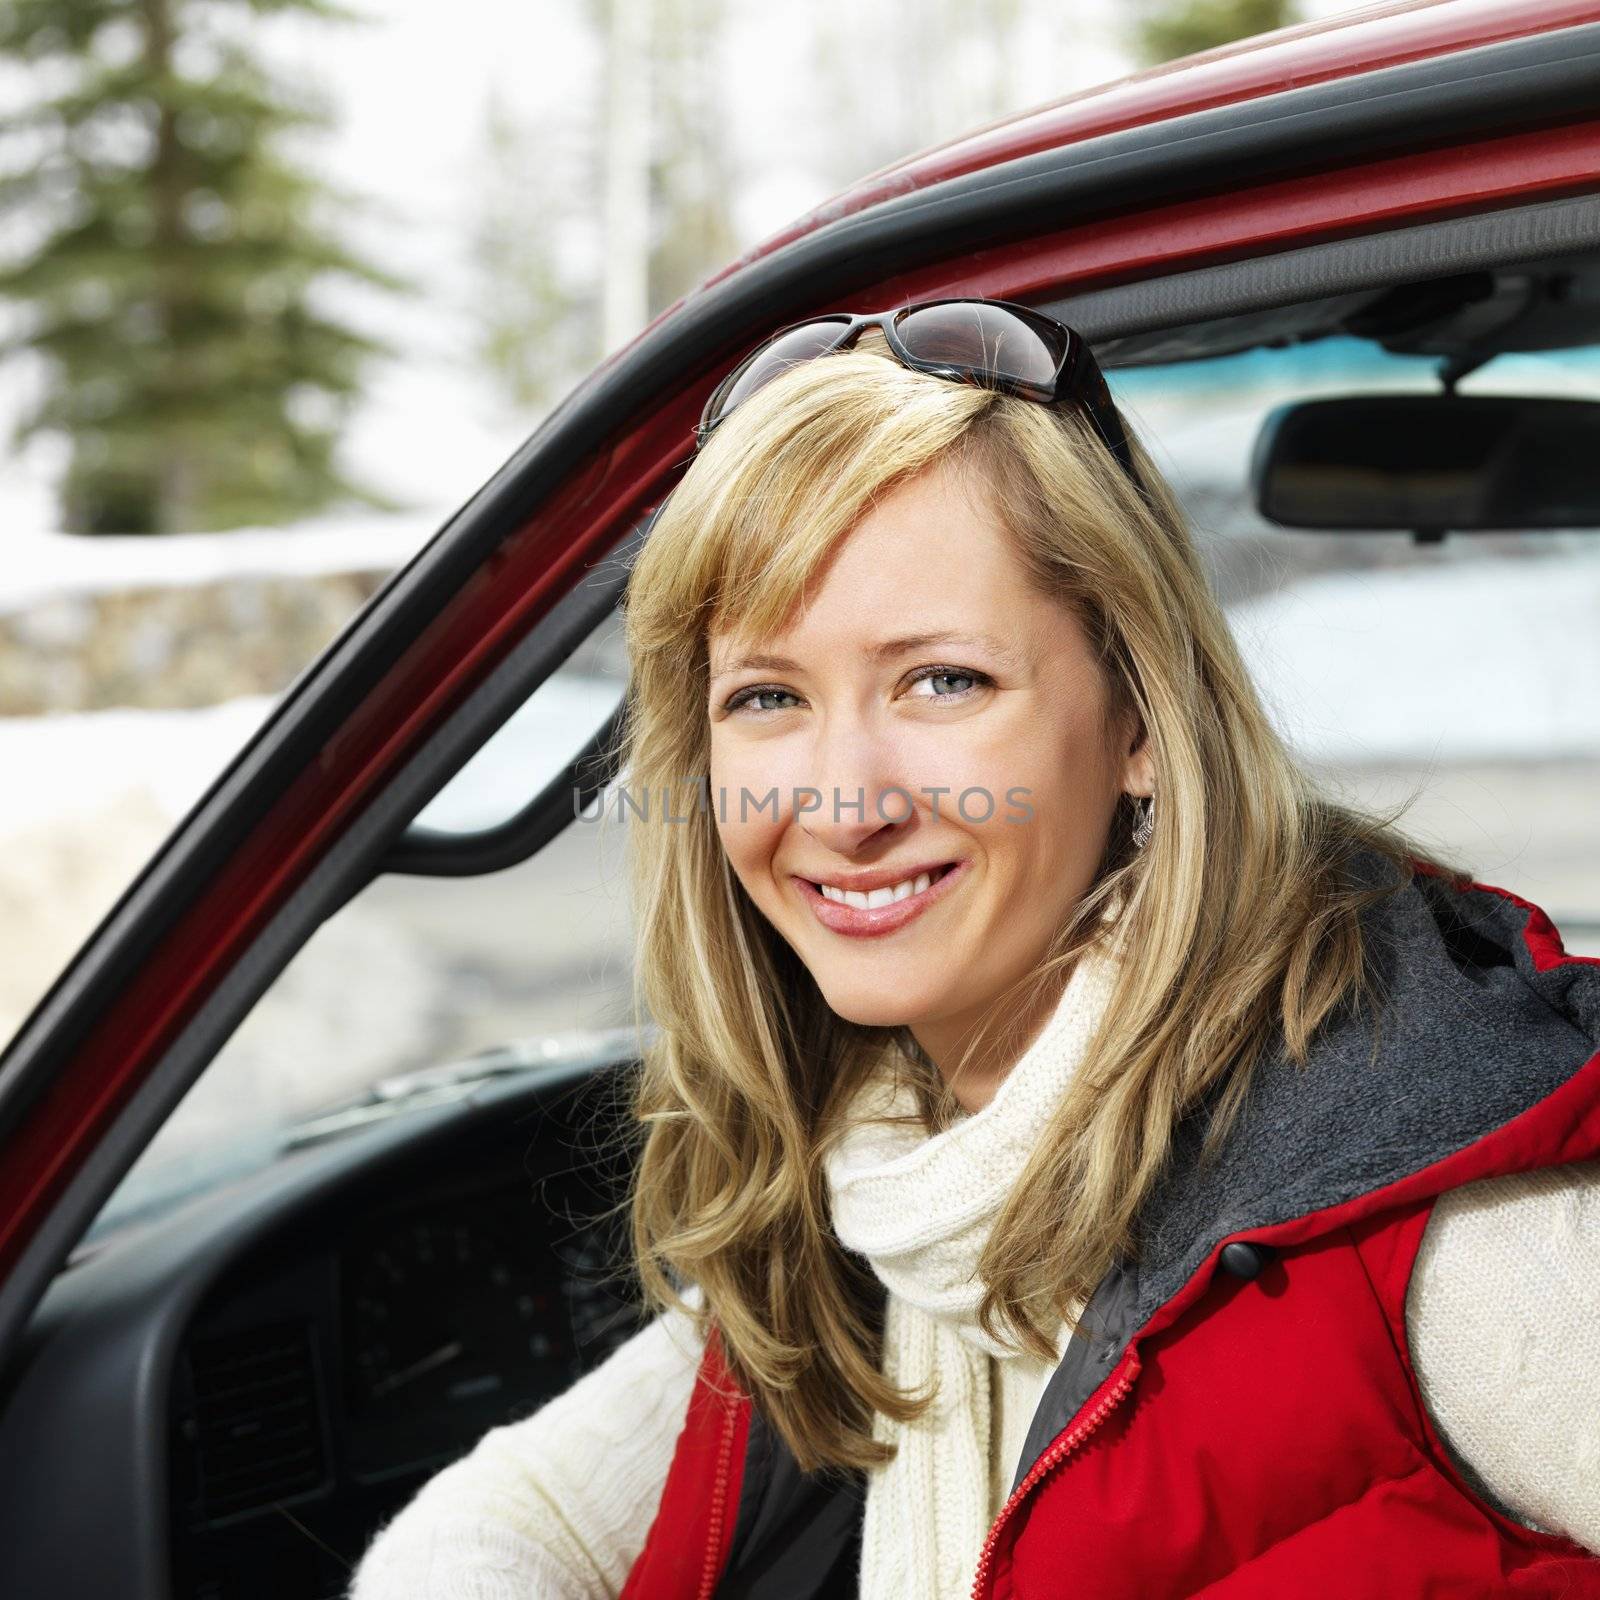 Pretty woman sitting in vehicle wearing winter clothes in rural snowy Colorado smiling.